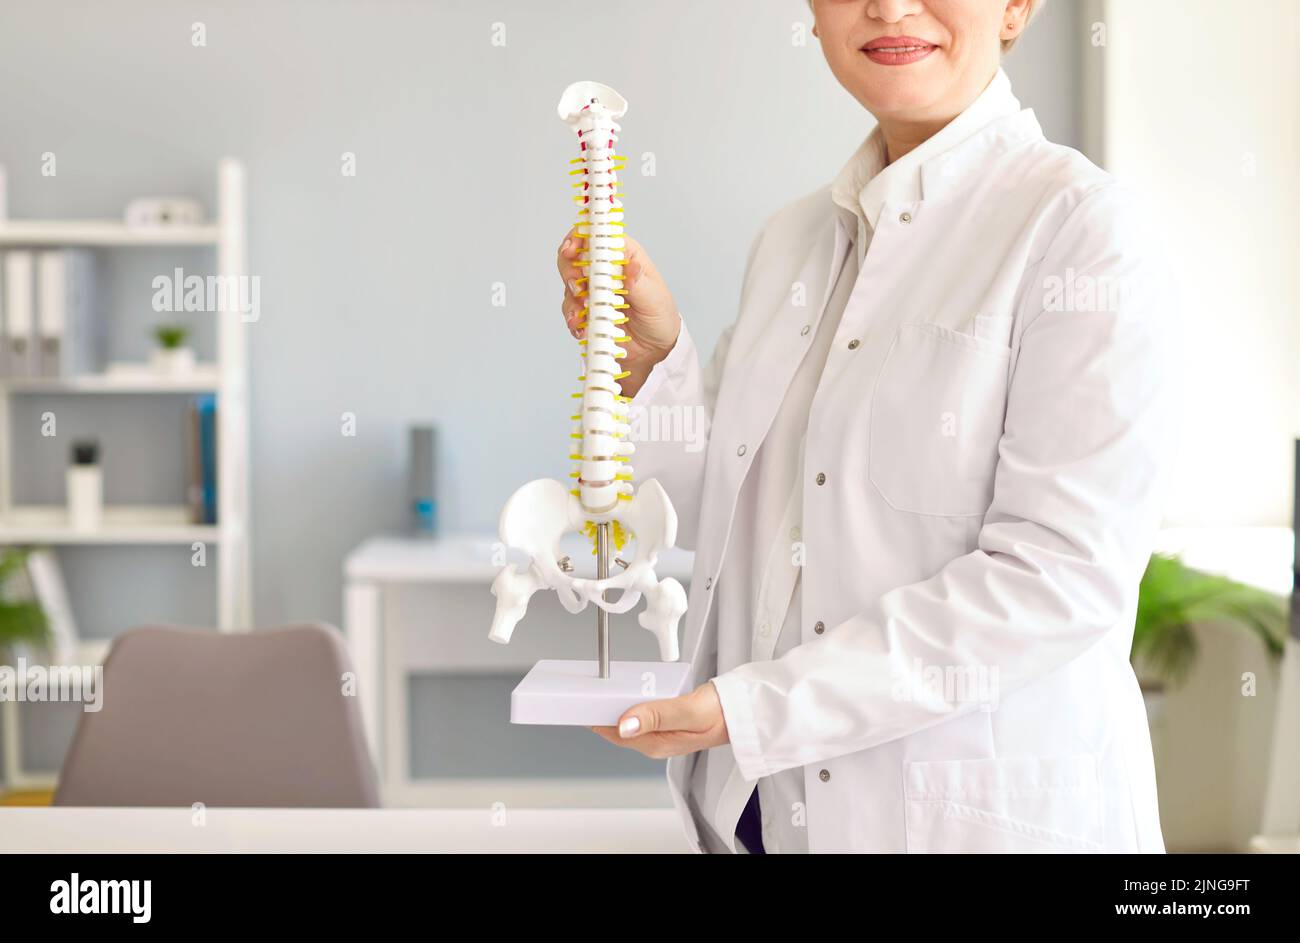 Cropped shot of doctor at orthopedic clinic holding anatomical model of human spine Stock Photo